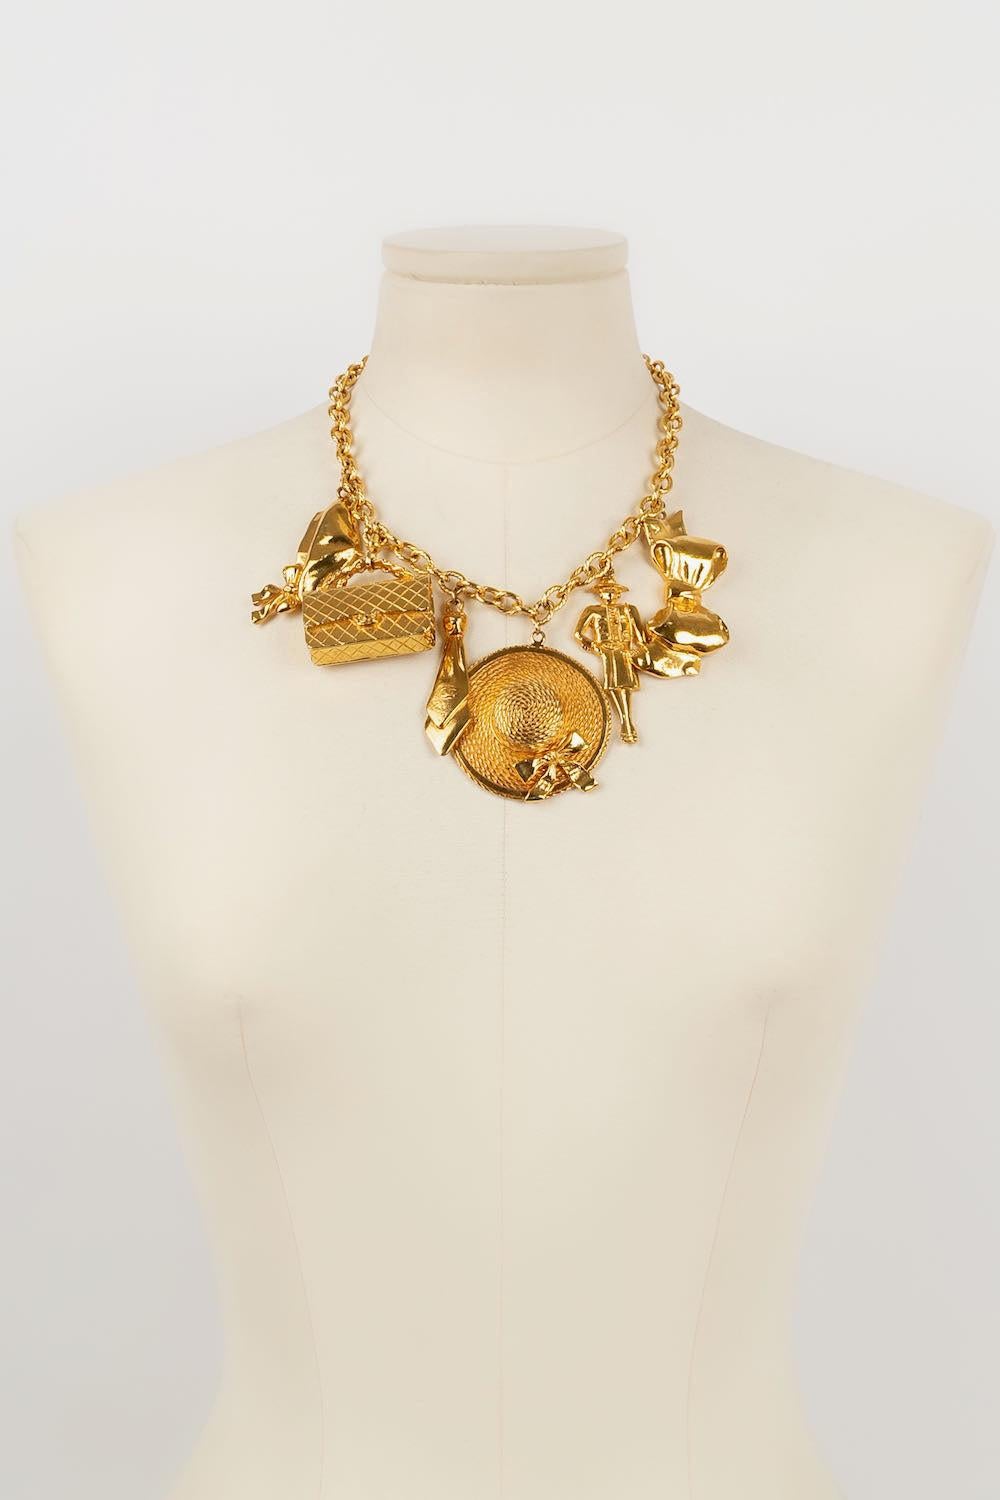 Chanel -(Made in France) Short gold metal necklace with charms featuring bags, bows and figurines.

Additional information: 
Dimensions: Length: 44 cm
Condition: Very good condition
Seller Ref number: CB80